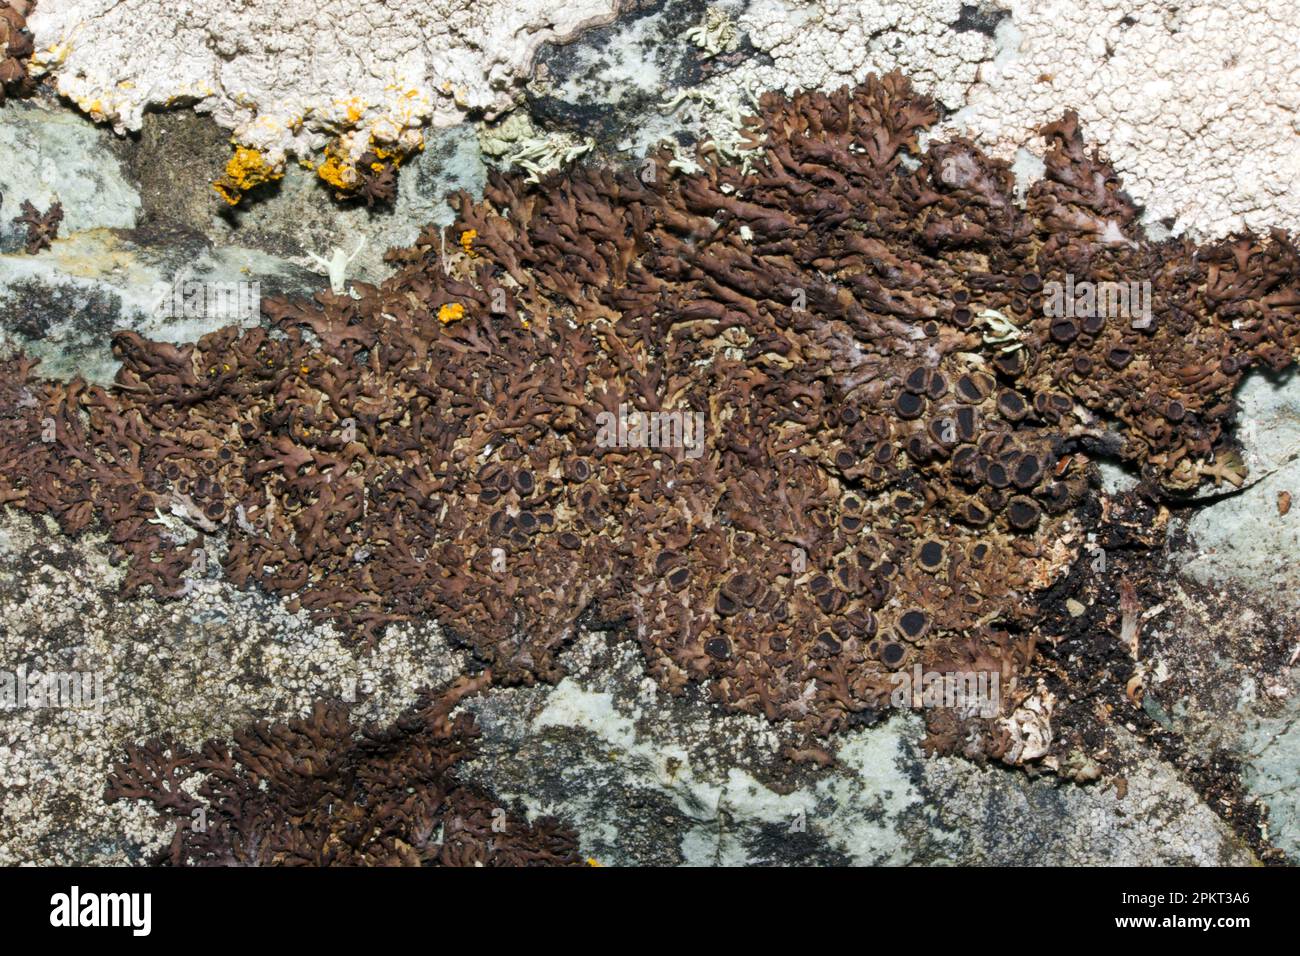 Anaptychia runcinata (foliose lichen) is found on coastal rocks mainly on  northern and western coasts. It is native to Europe and North America. Stock Photo